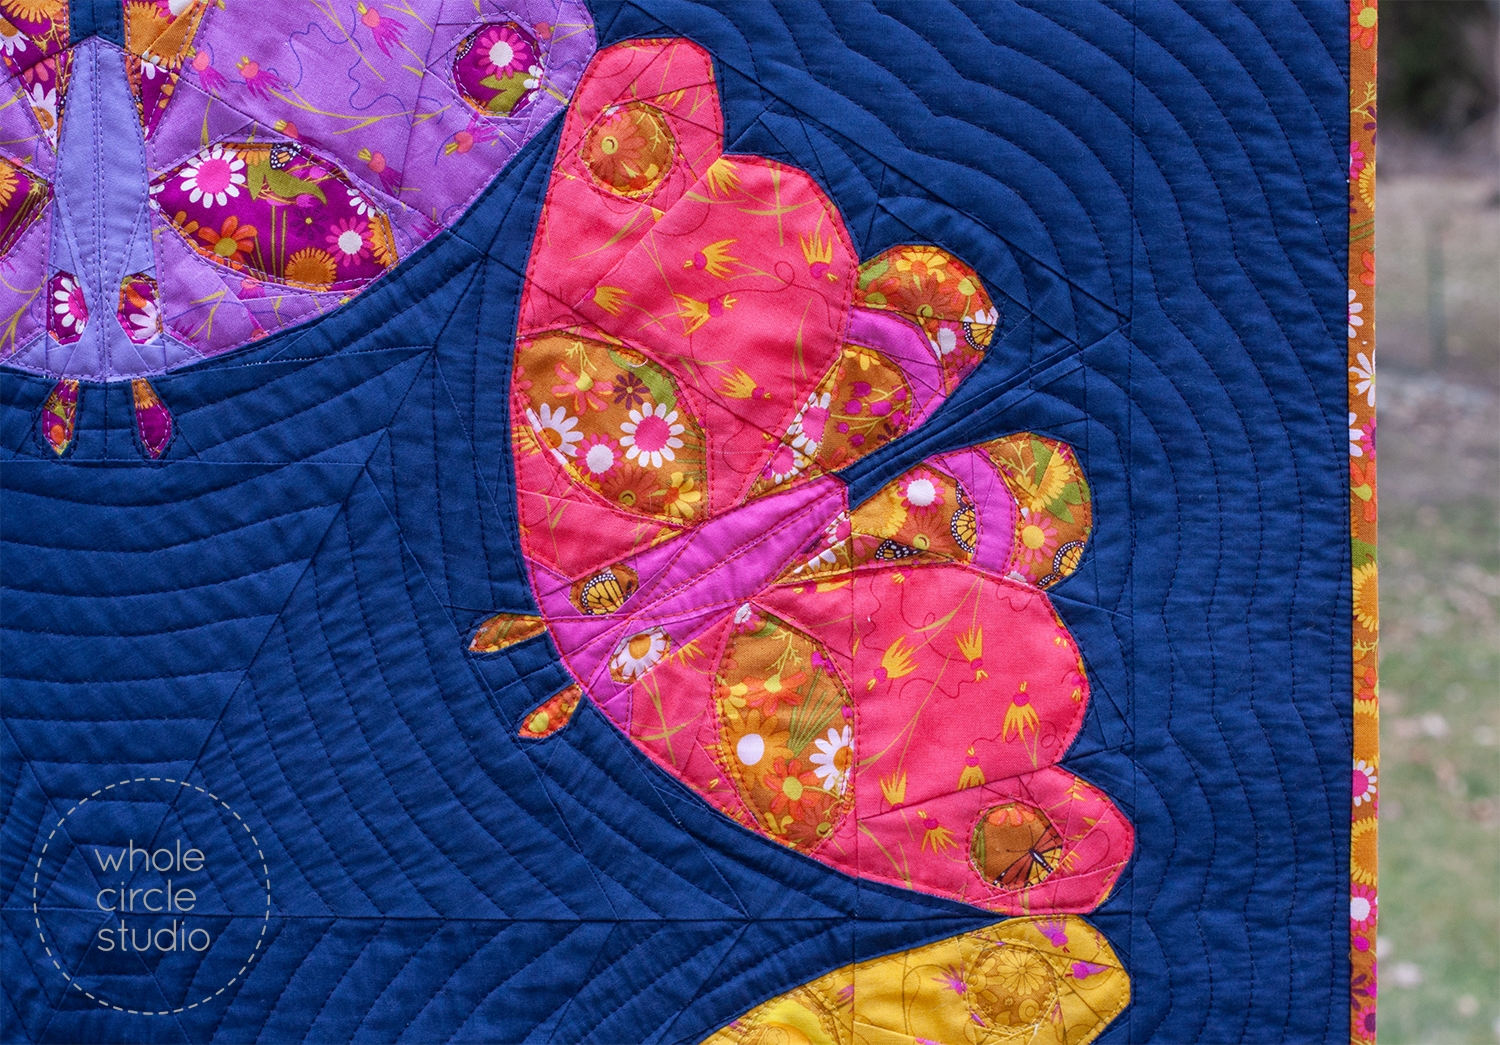 detail of a quilt with 6 moths in a circle